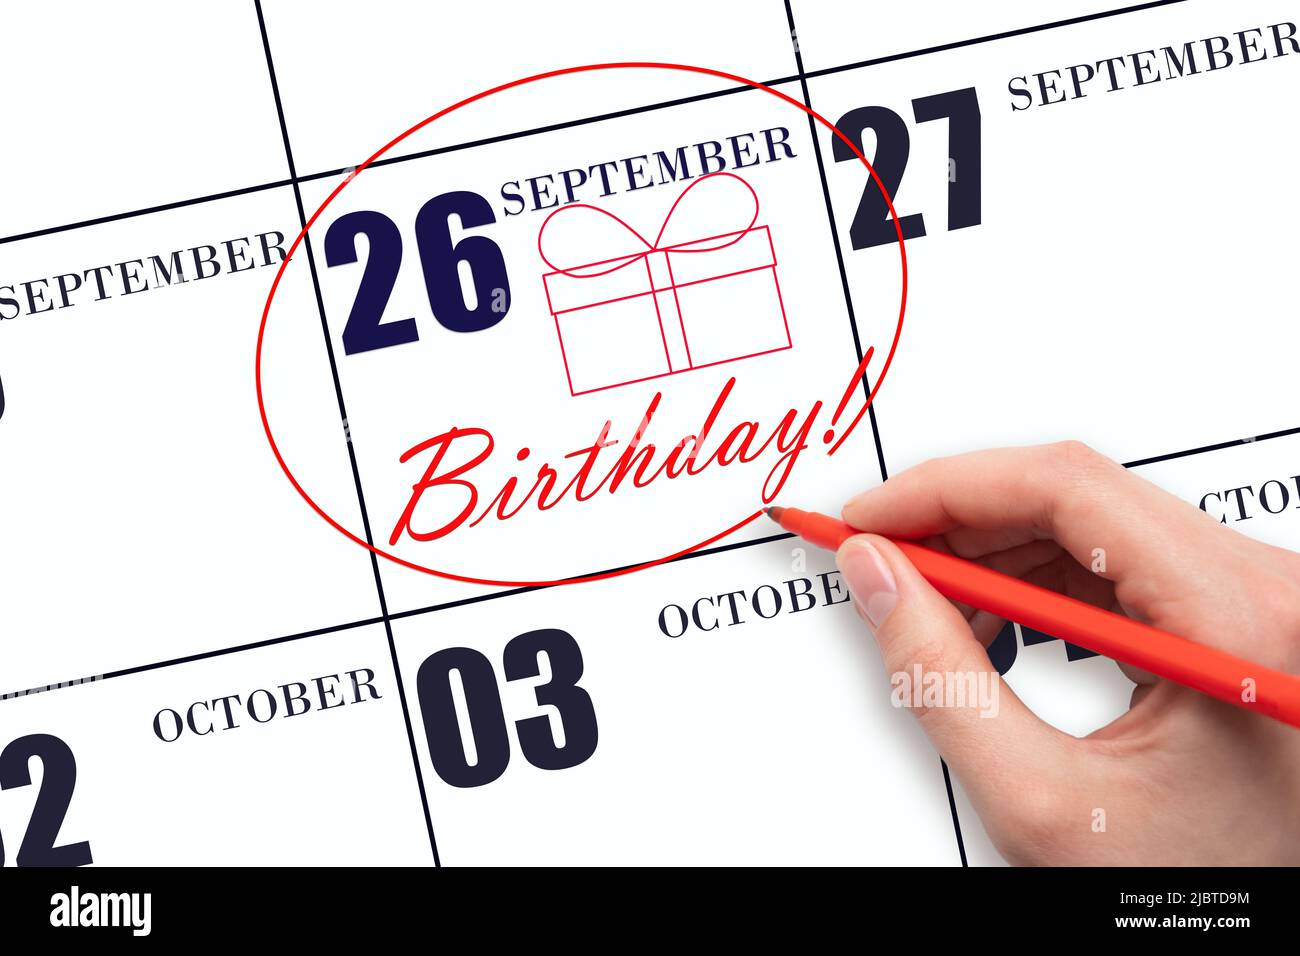 26th day of September. The hand circles the date on the calendar 26 September , draws a gift box and writes the text Birthday. Holiday. Autumn month, Stock Photo